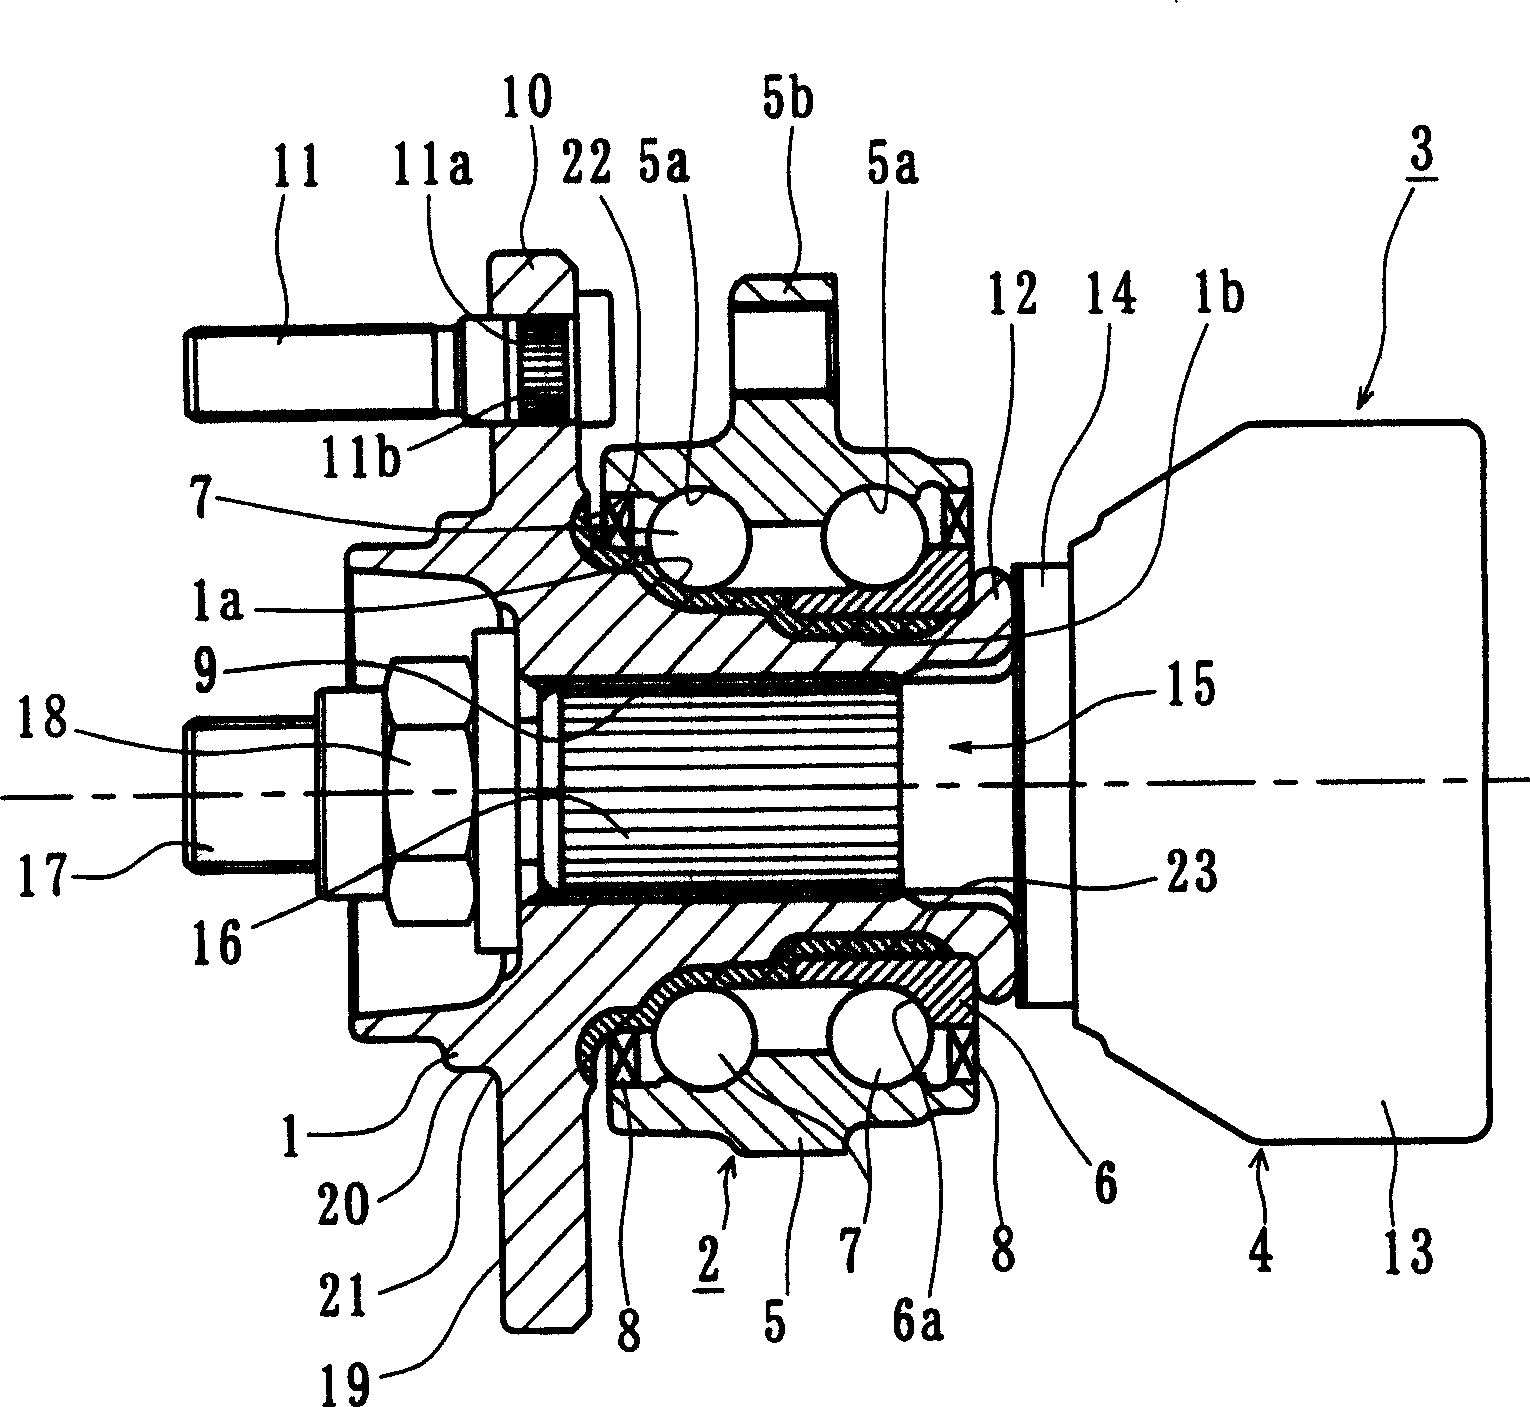 Bearing apparatus for a wheel of vehicle